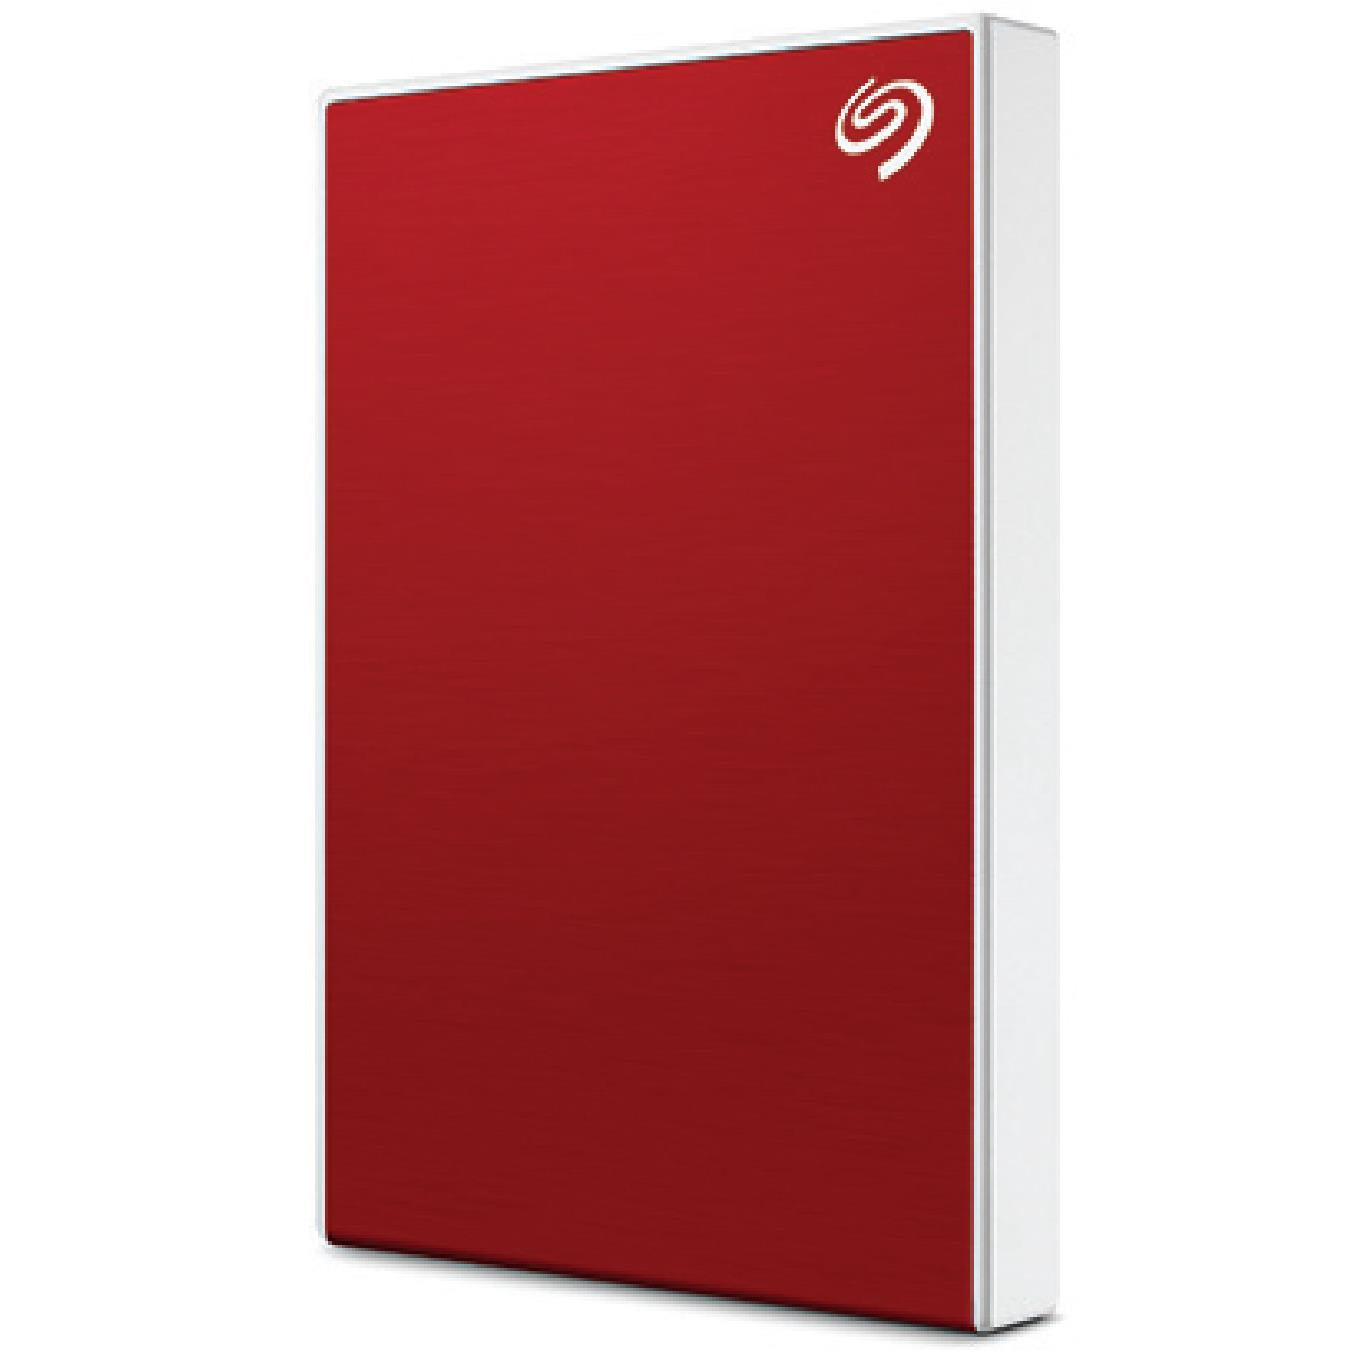 seagate one touch portable 1tb hard drive (red)